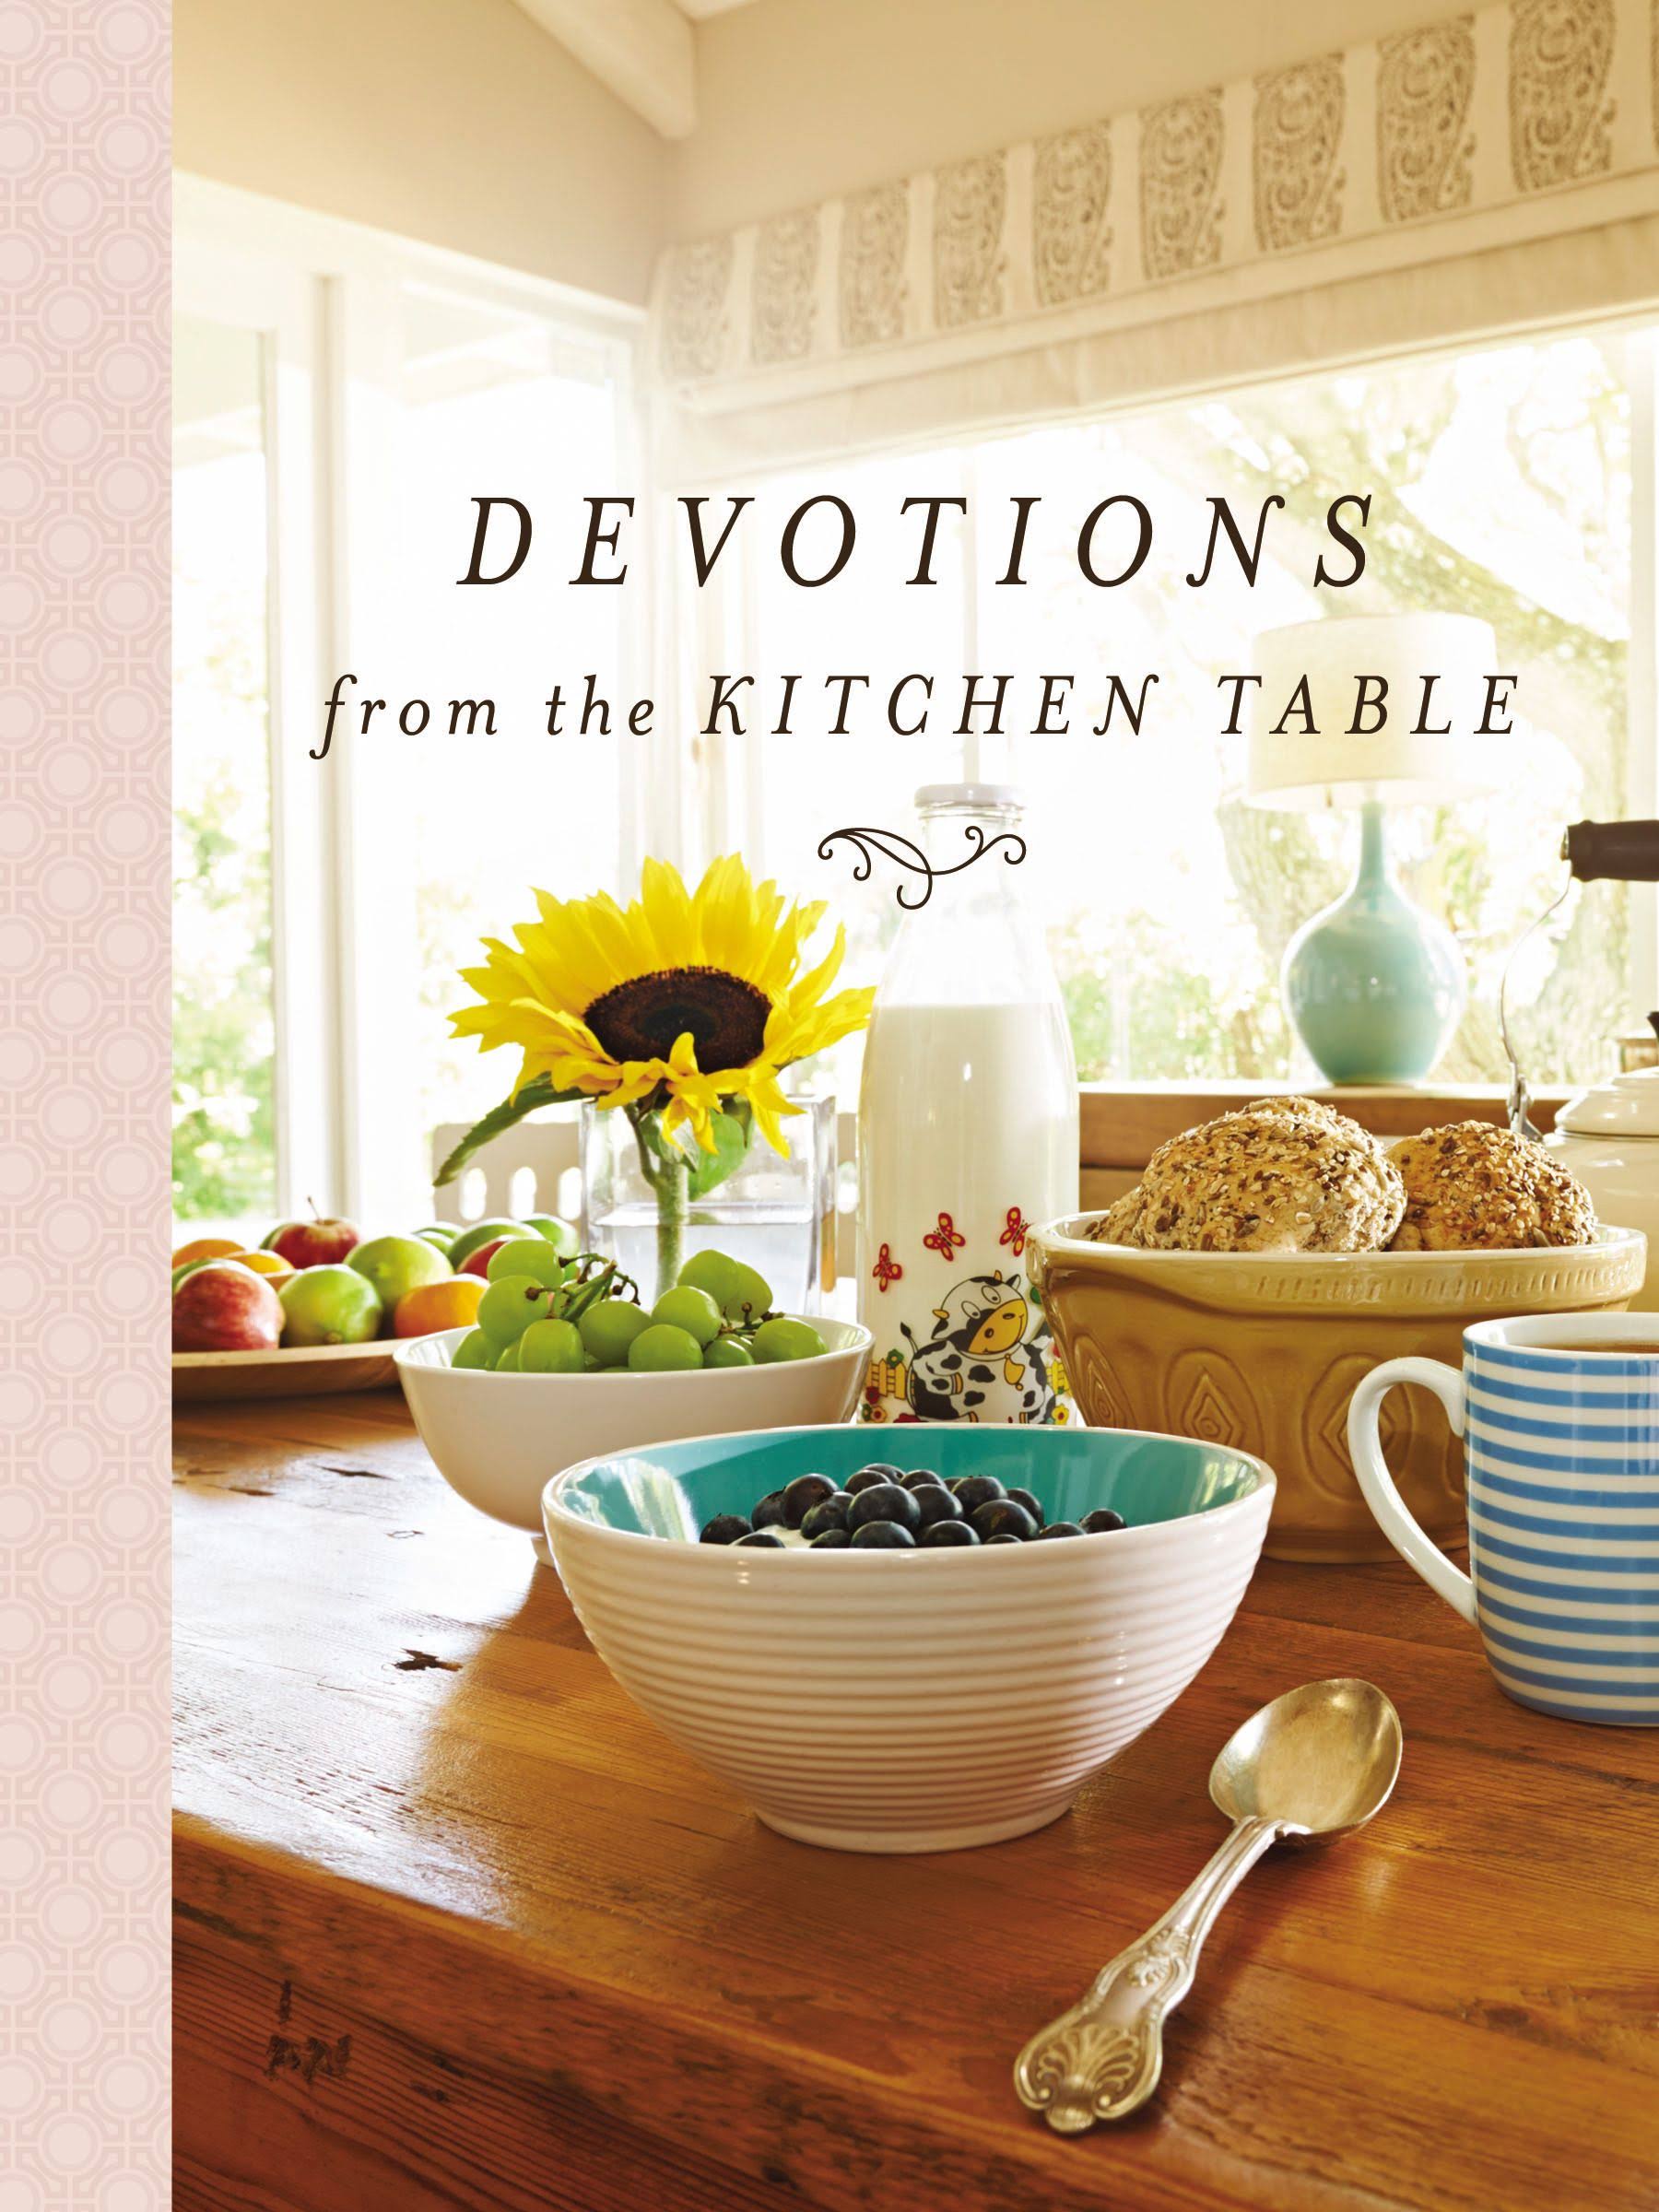 Devotions from the Kitchen Table [Book]